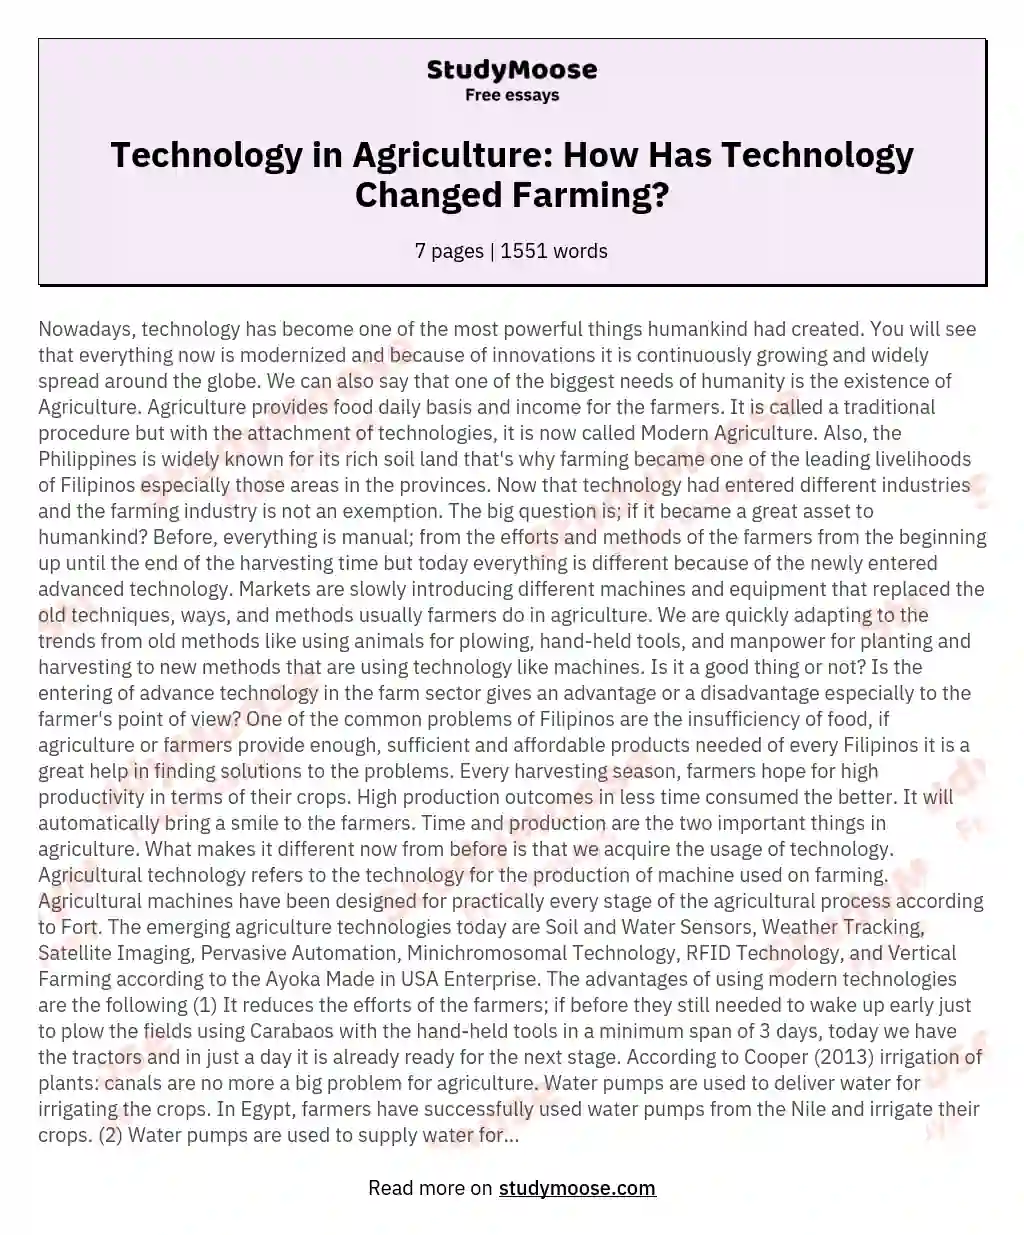 Technology in Agriculture: How Has Technology Changed Farming?